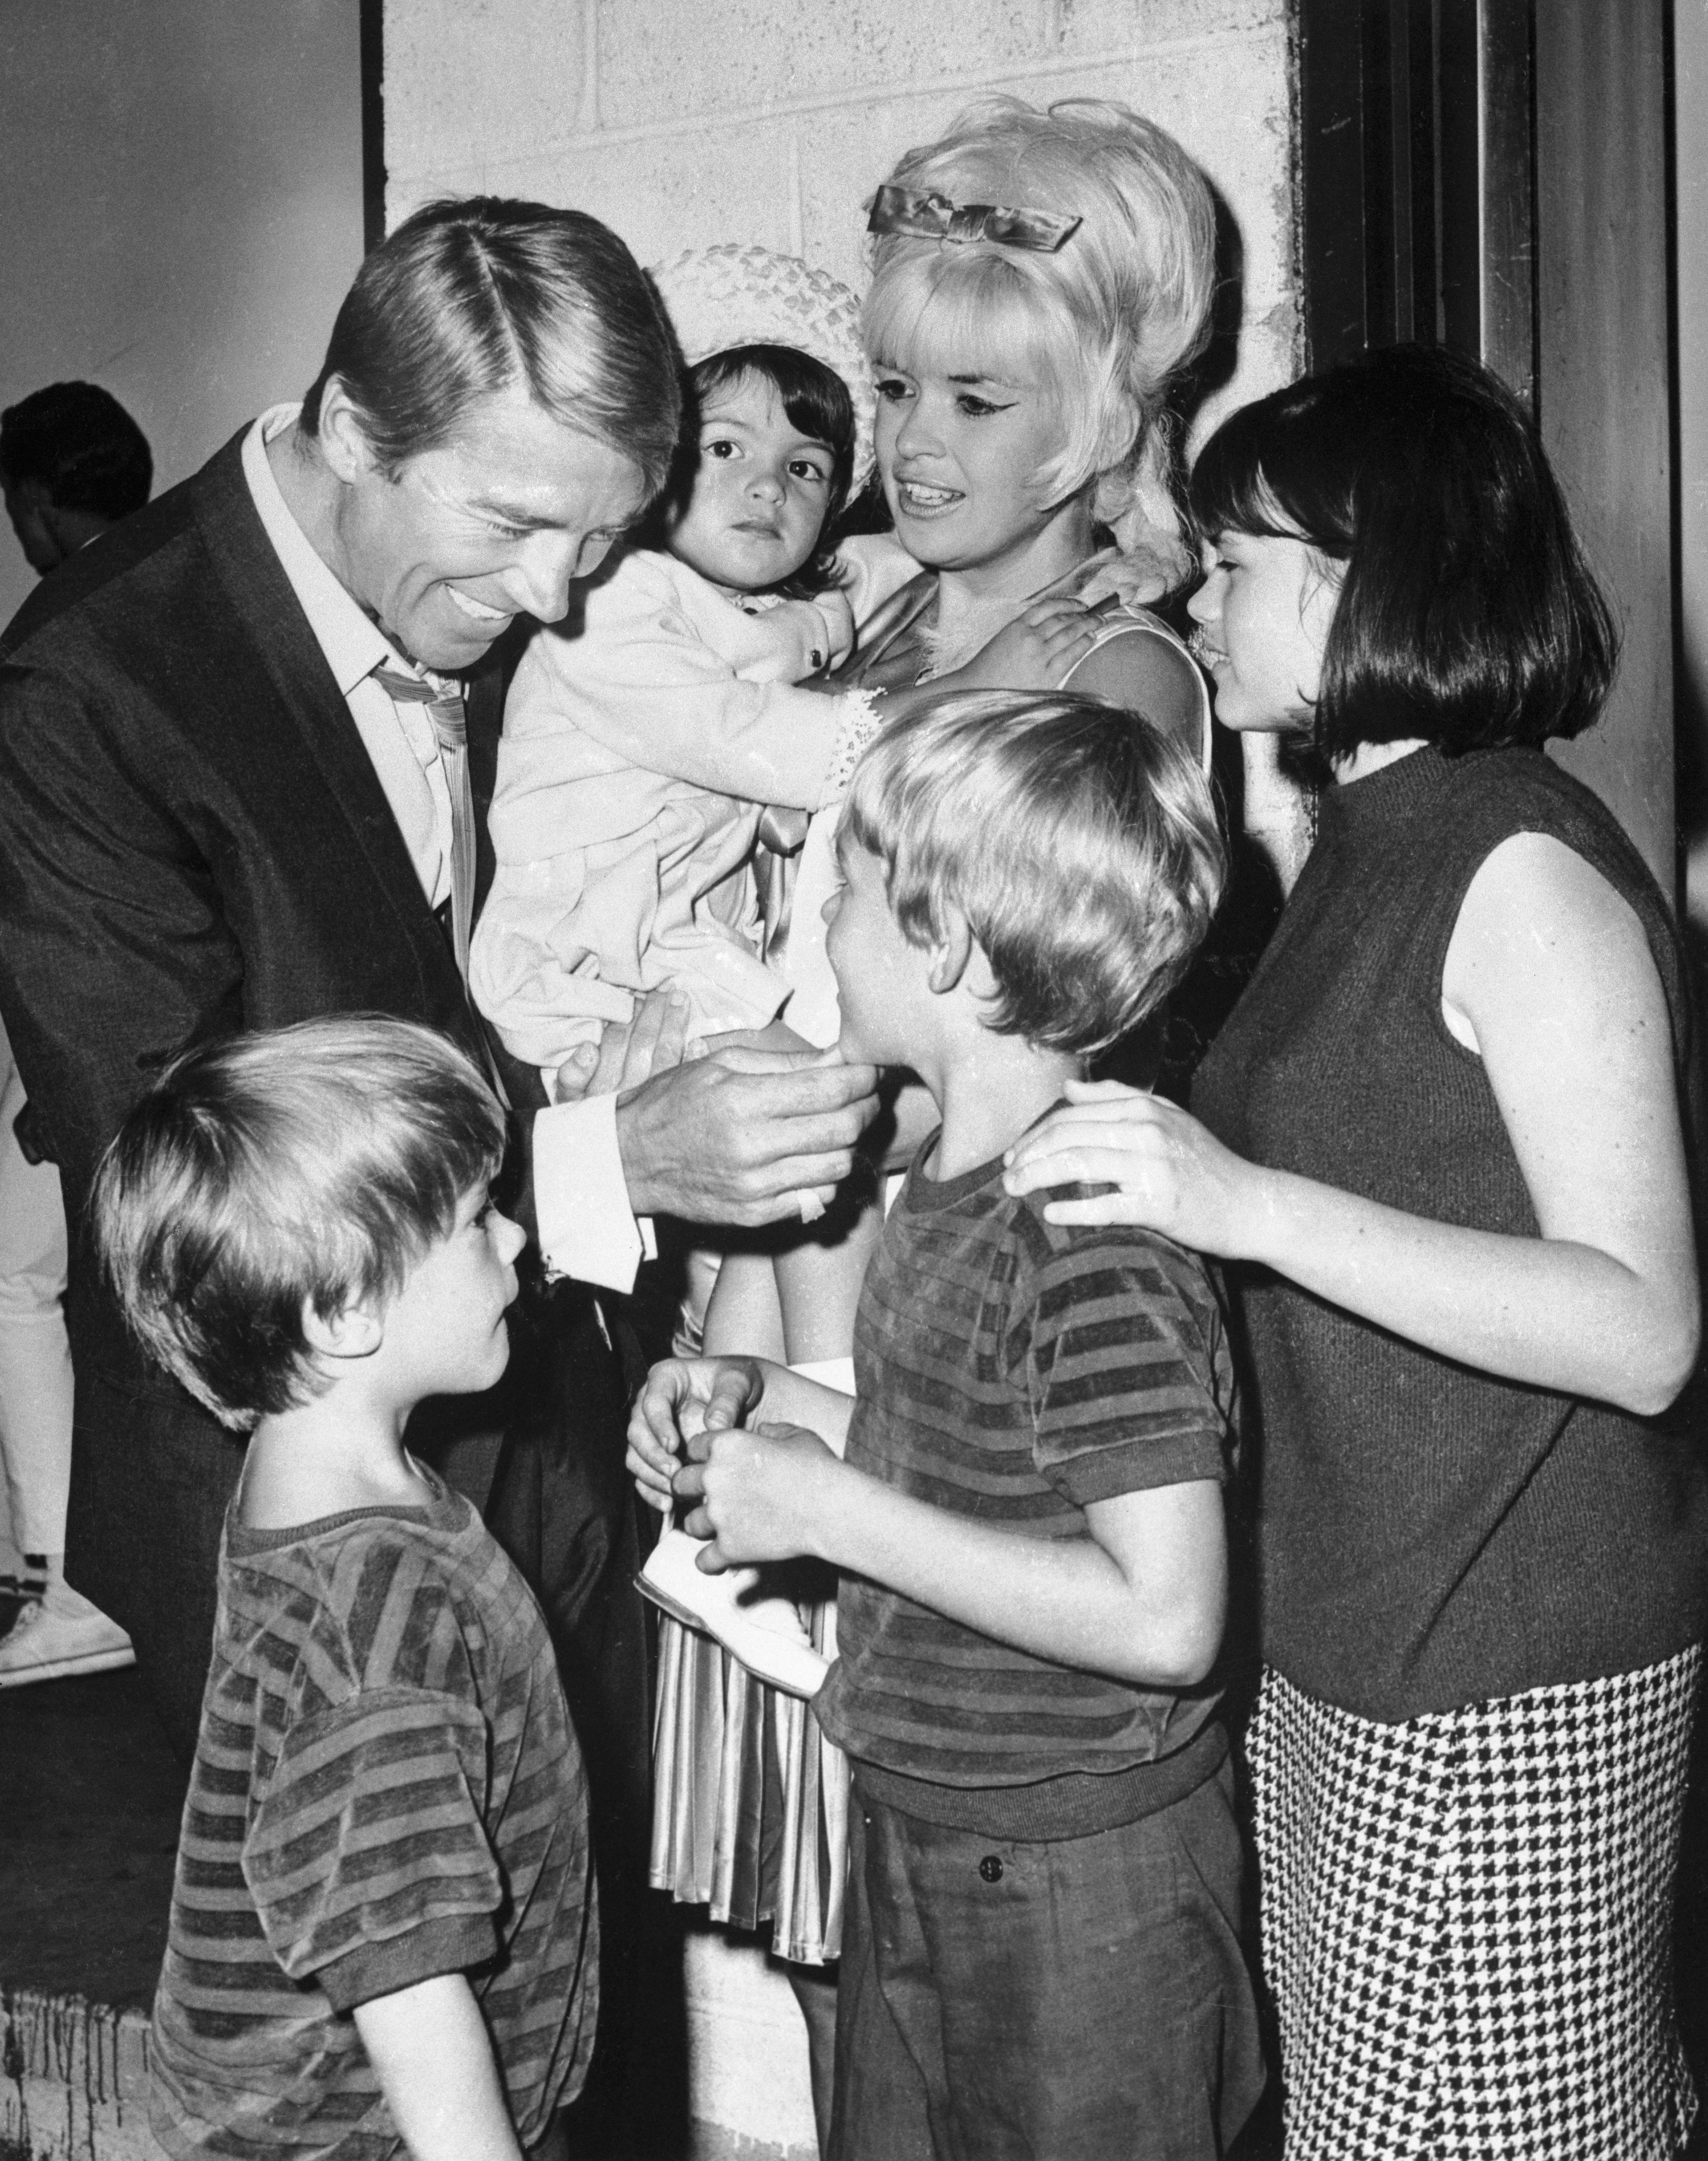 Mickey Hargitay, with his former wife Jayne Mansfield, and their children Zoltan, 5, Mikos, 7, and Mariska 2, and Jayne Maria, 14, on July 19, 1966, backstage at the Westbury, L. I. Music Fair | Source: Getty Images